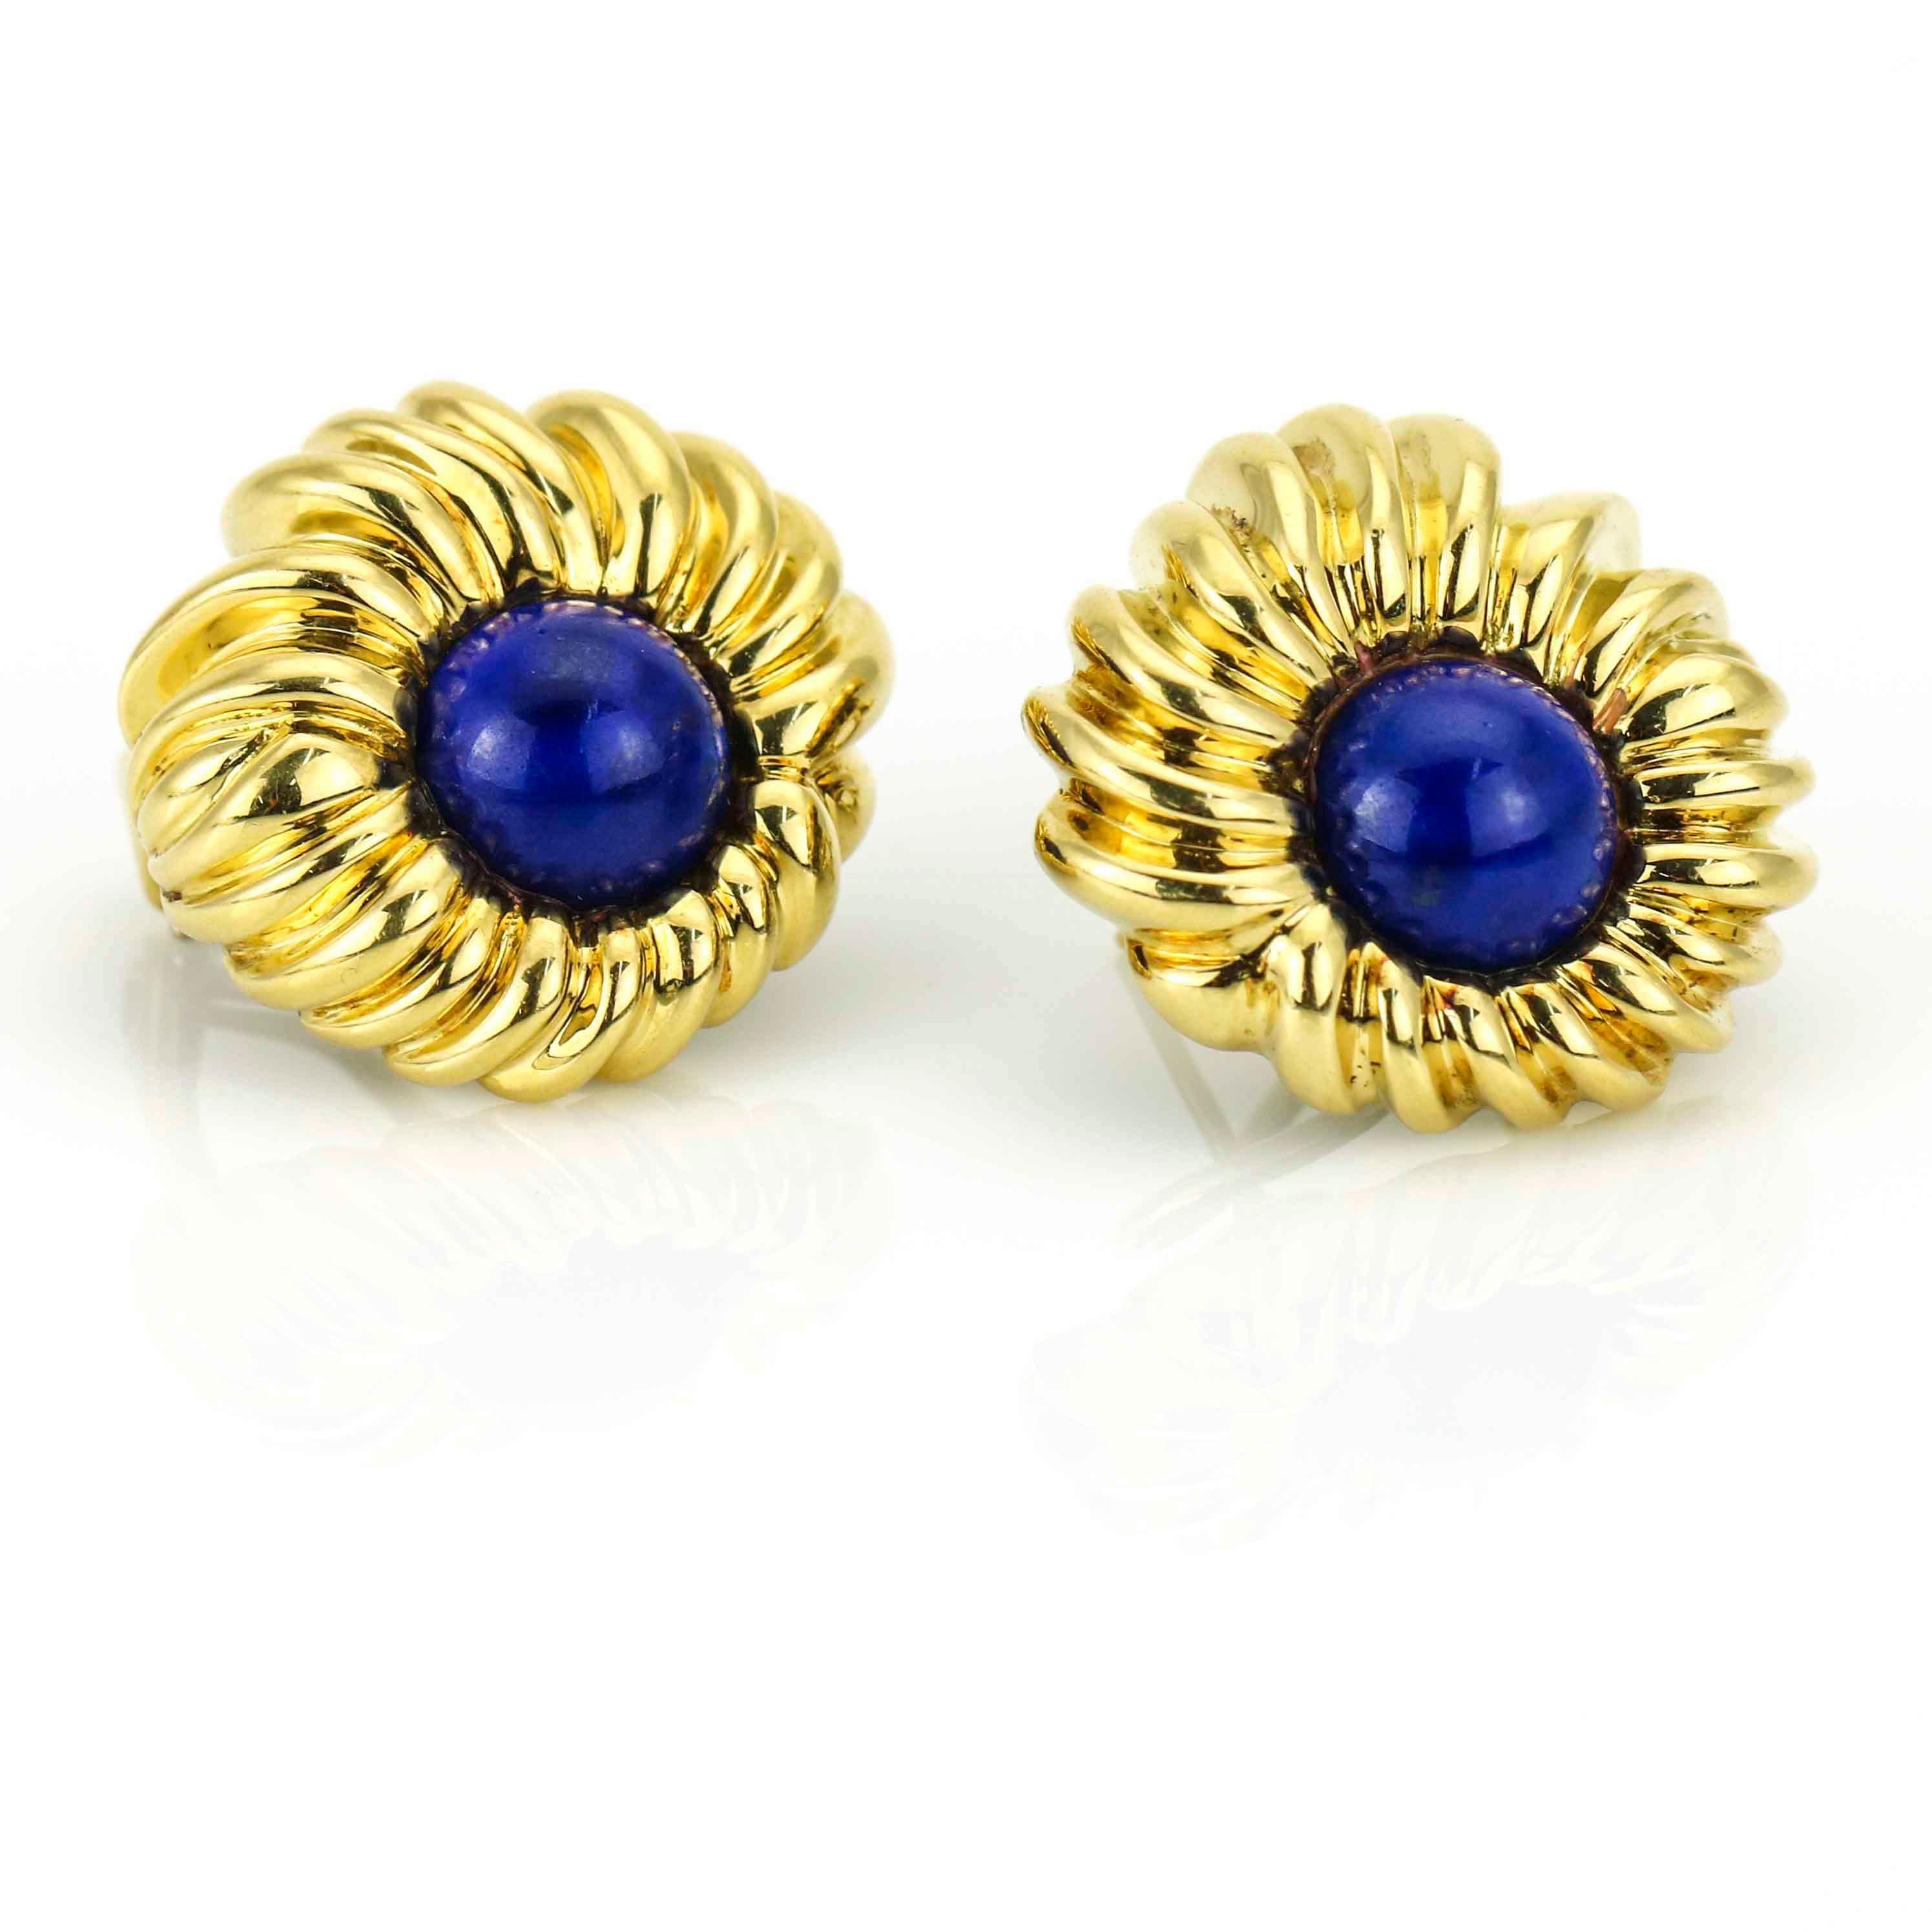 Tiffany & Co. Lapis Lazuli 18 Karat Yellow Gold Earrings In Excellent Condition For Sale In Fort Lauderdale, FL